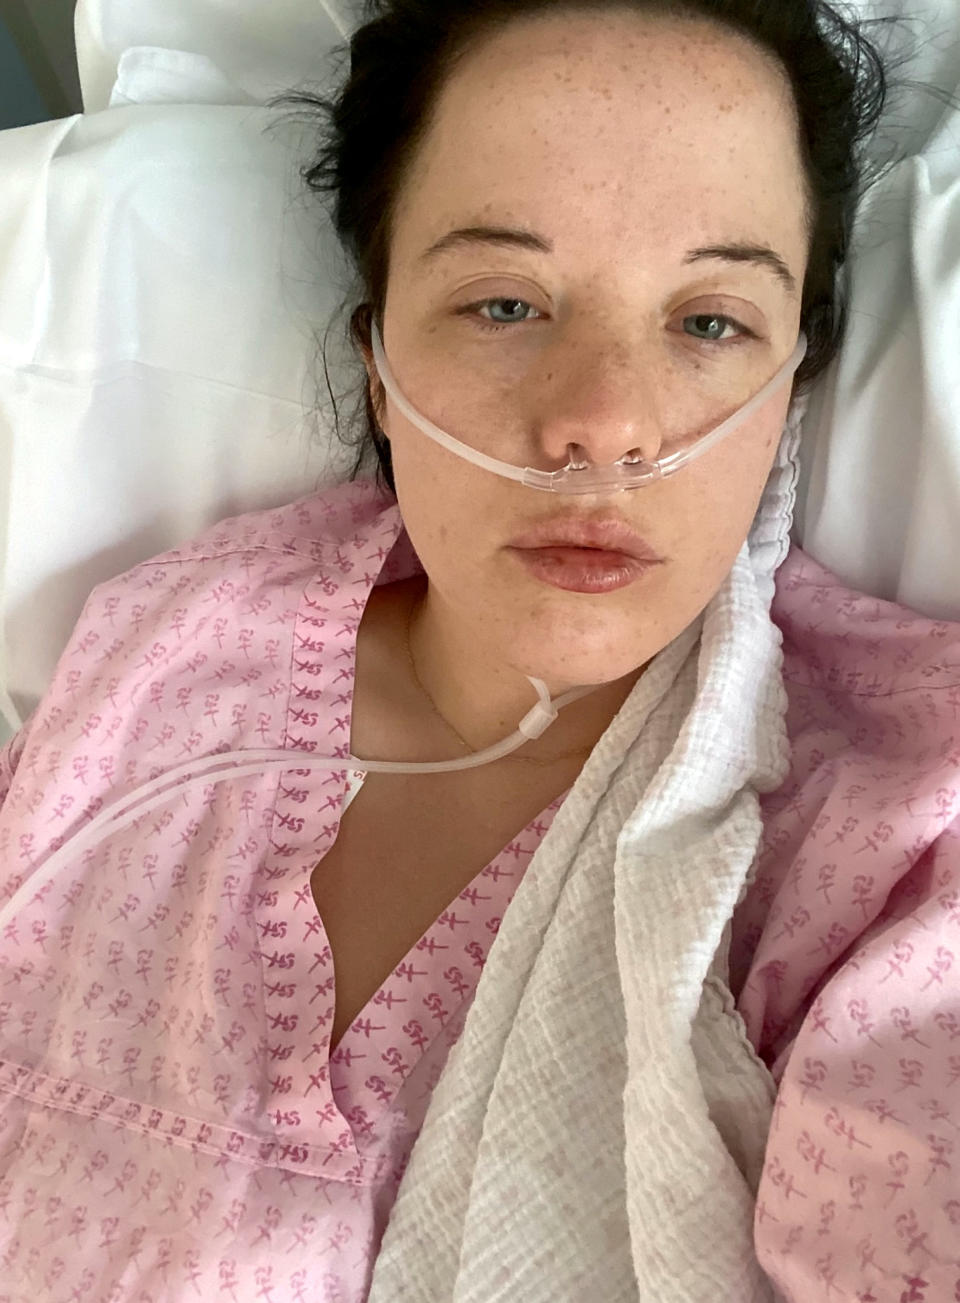 Kirsty Hext in hospital after her allergic reaction of the Pfizer vaccine. (SWNS)